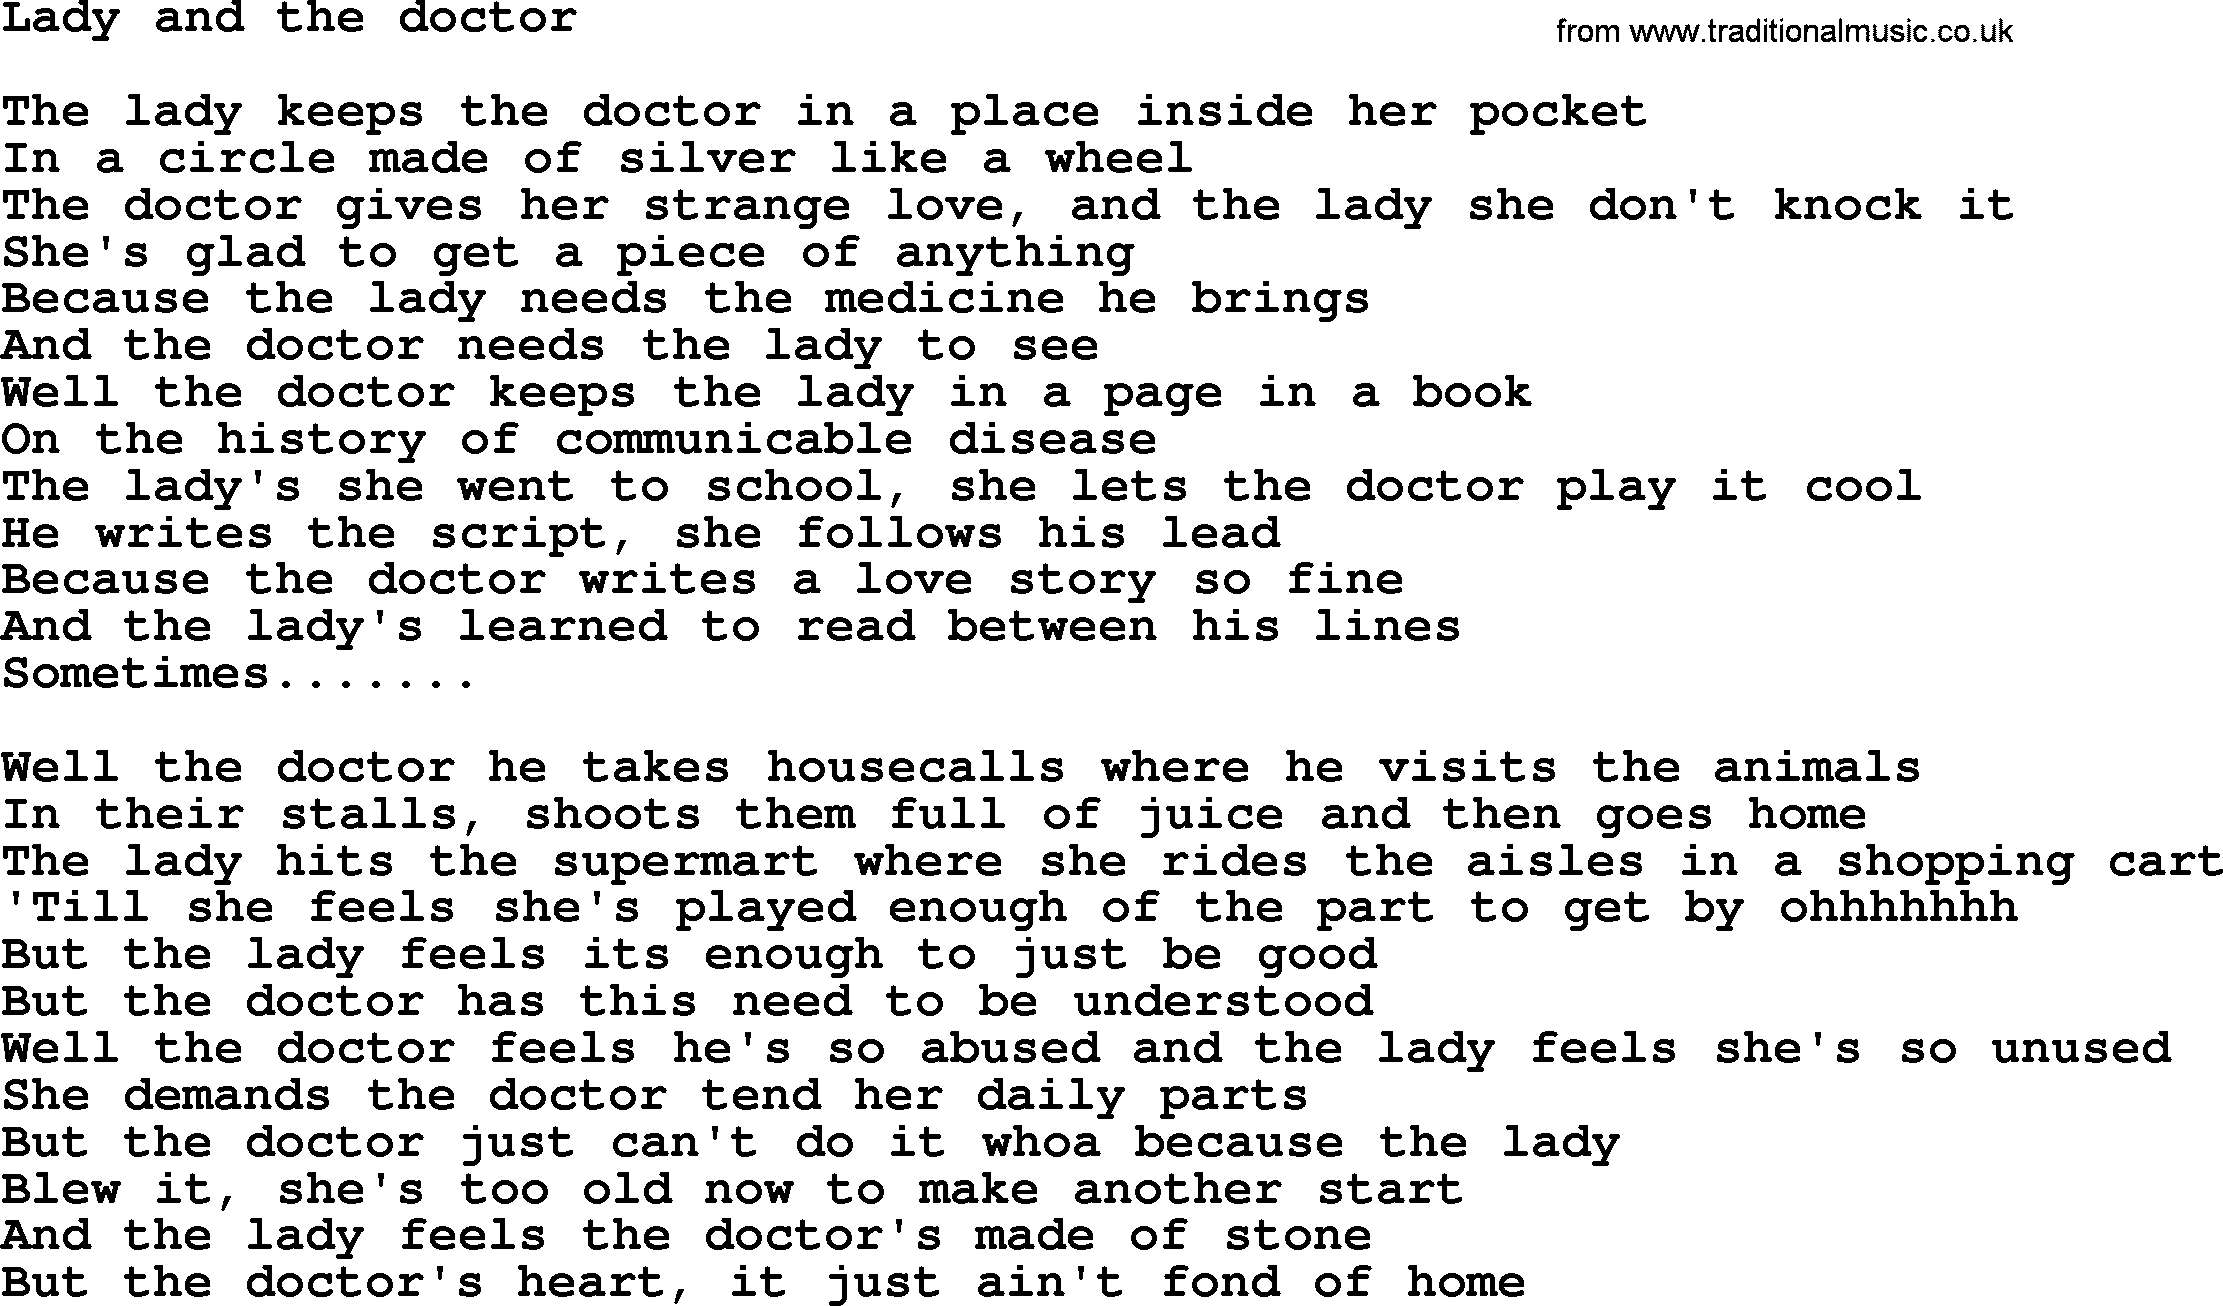 Bruce Springsteen song: Lady And The Doctor lyrics